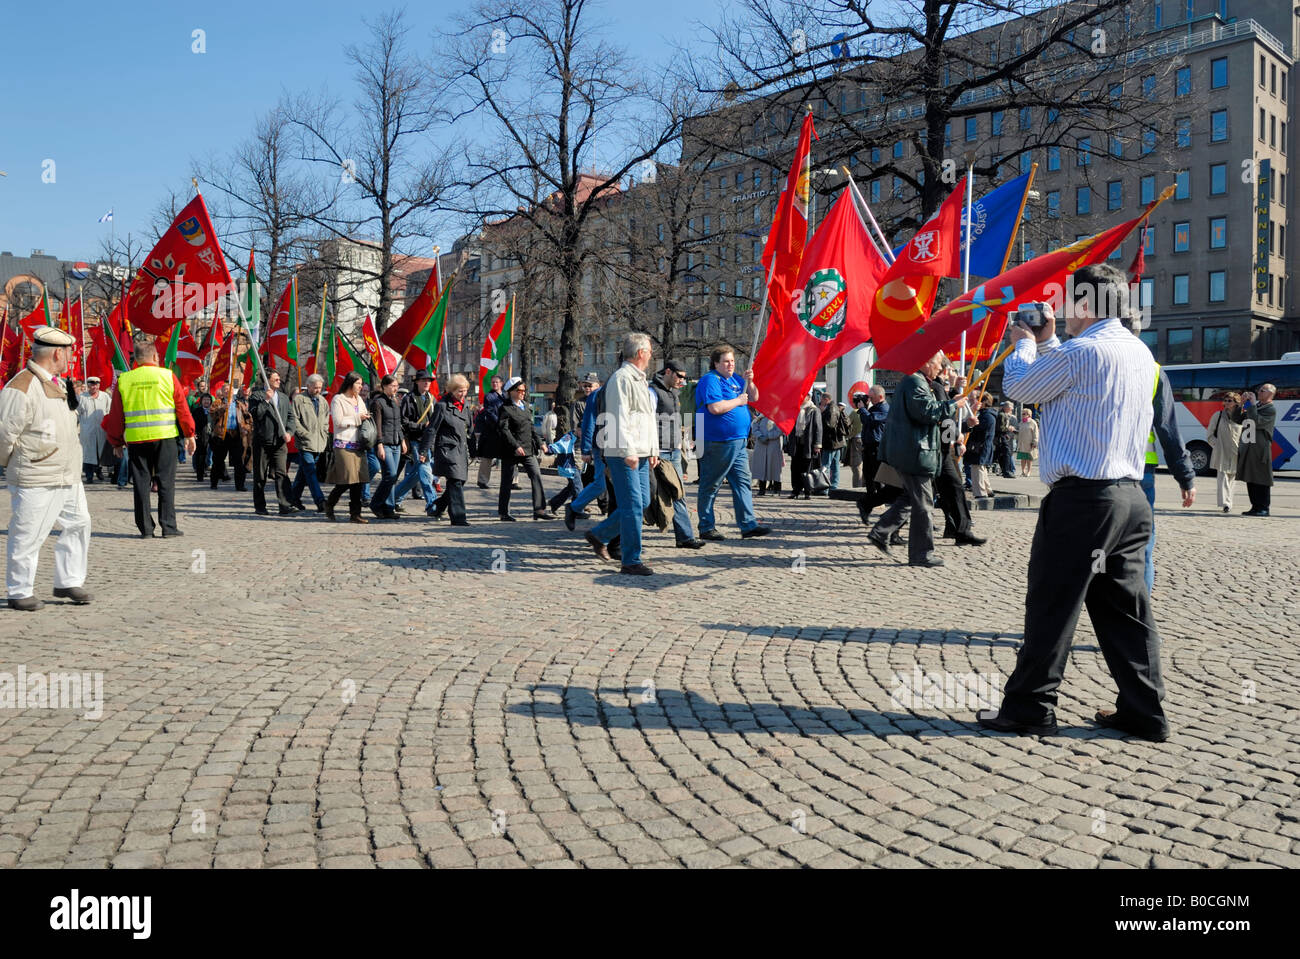 The Finnish labour union, SAK, May Day parade with red union flags, Helsinki, Finland, Europe. Stock Photo